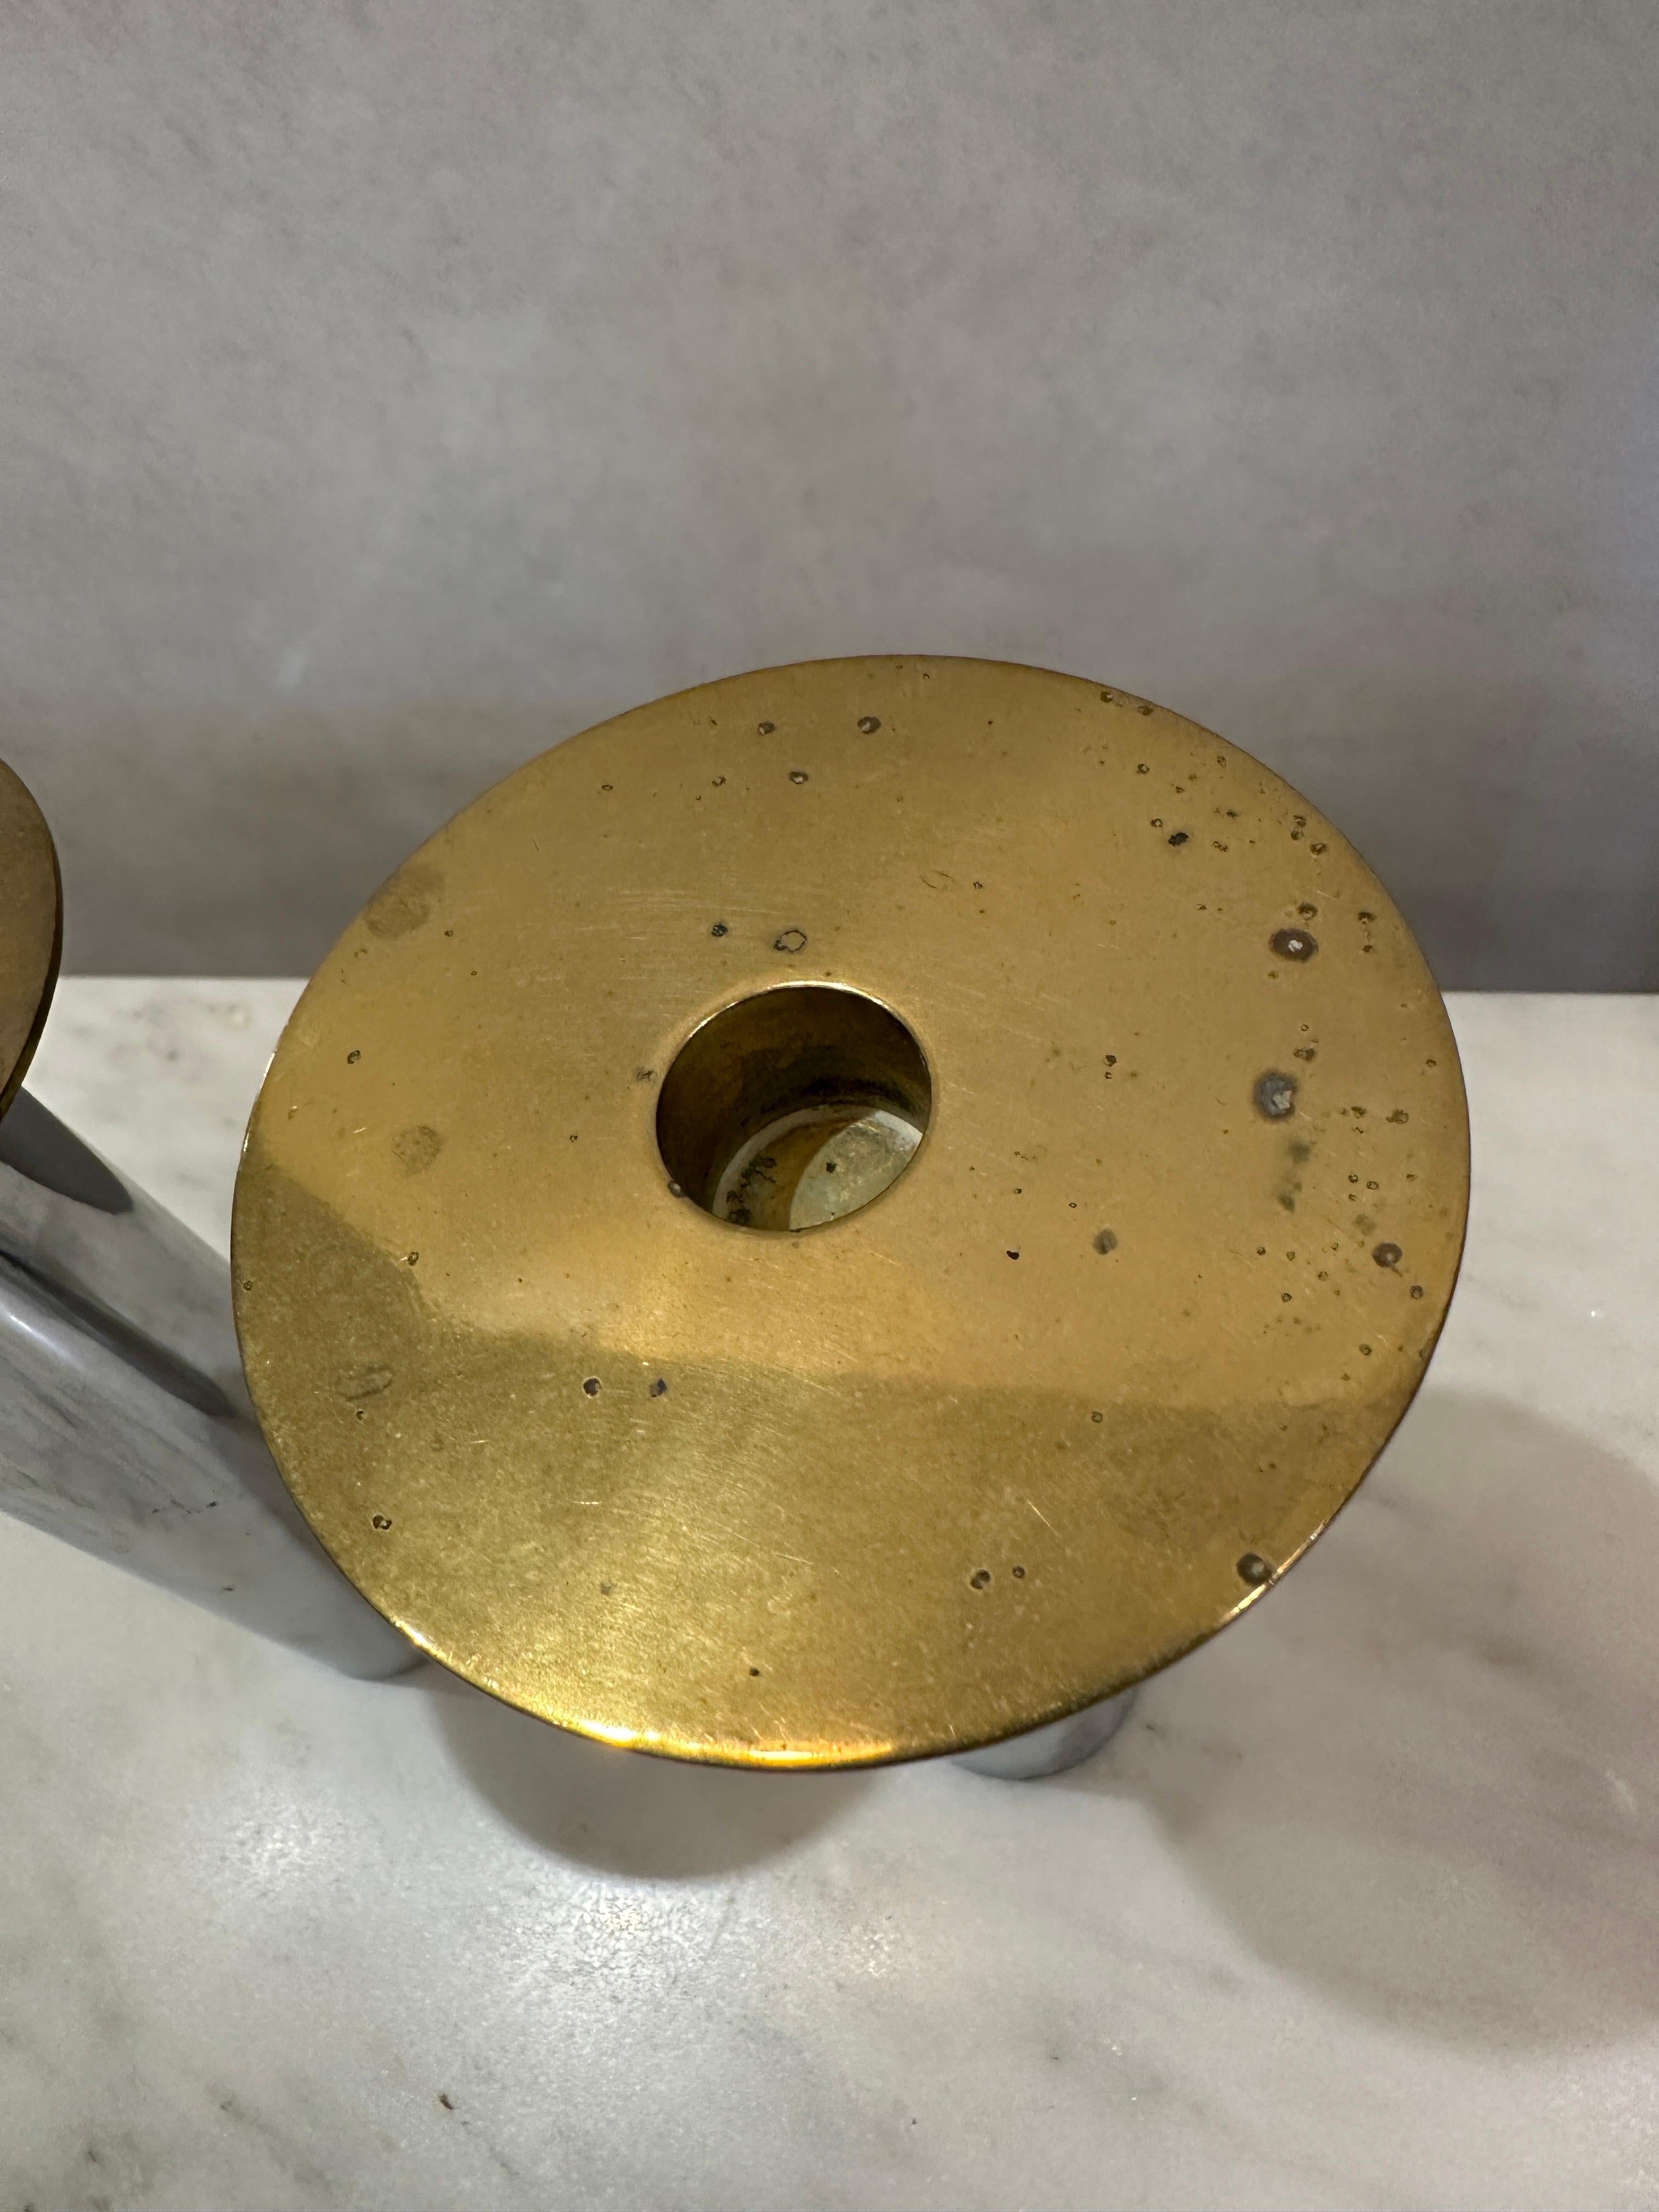 Pair of Torben Ørskov Candle Holders in Patinaed Brass & Nickel In Good Condition For Sale In East Hampton, NY